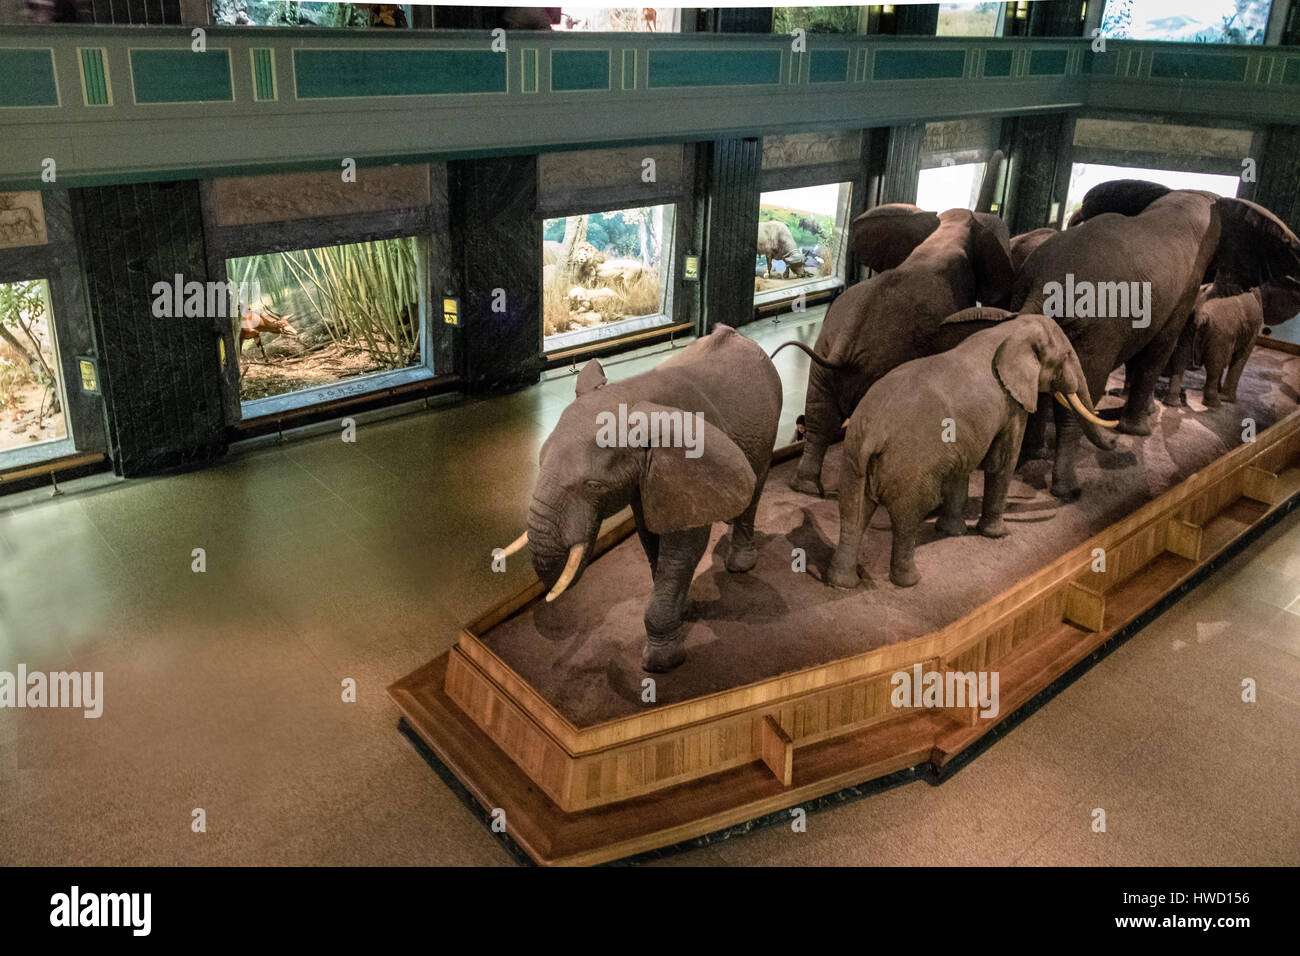 Elephant Models at Hall of African Mammals of the American museum of Natural History (AMNH) - New York, USA Stock Photo